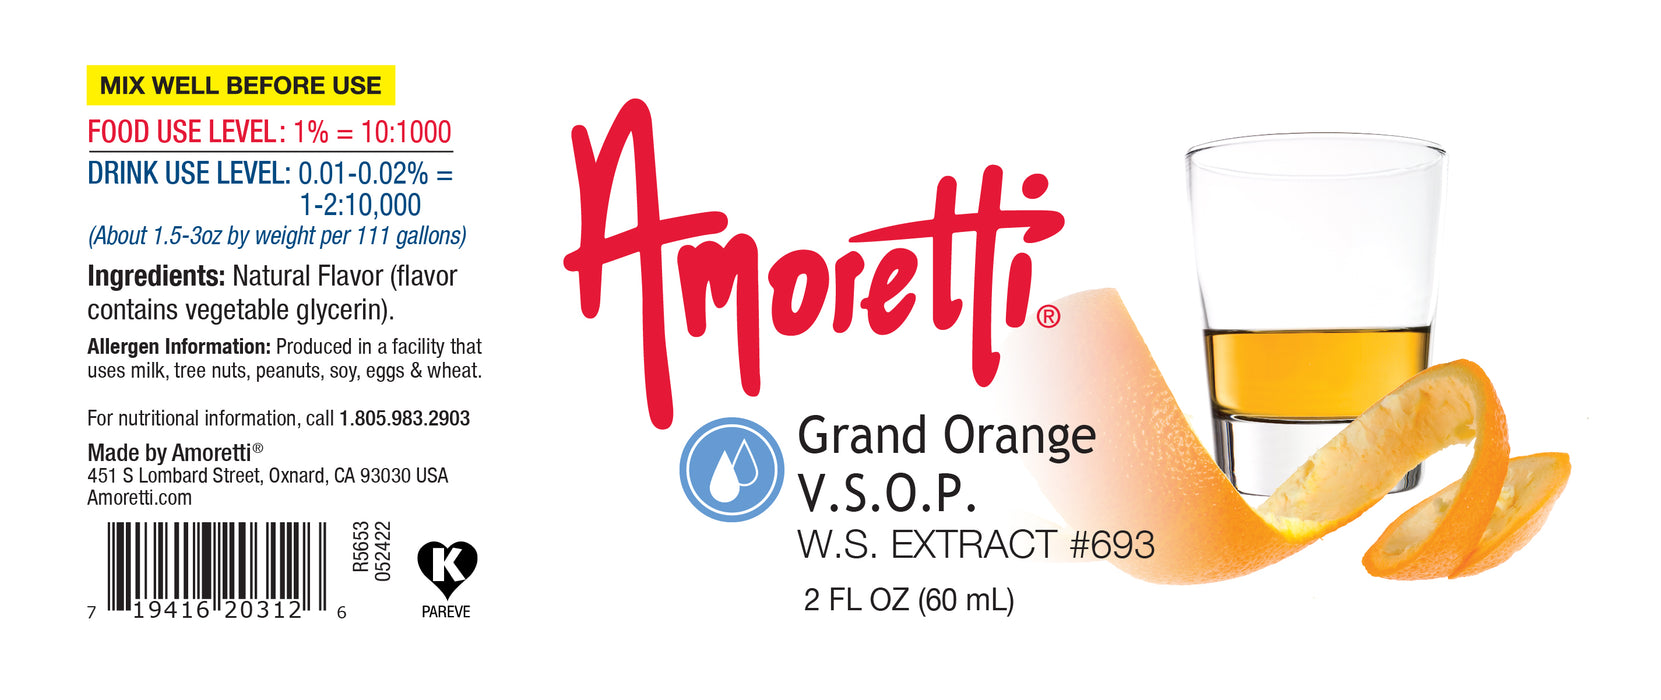 Grand Orange VSOP Extract Water Soluble